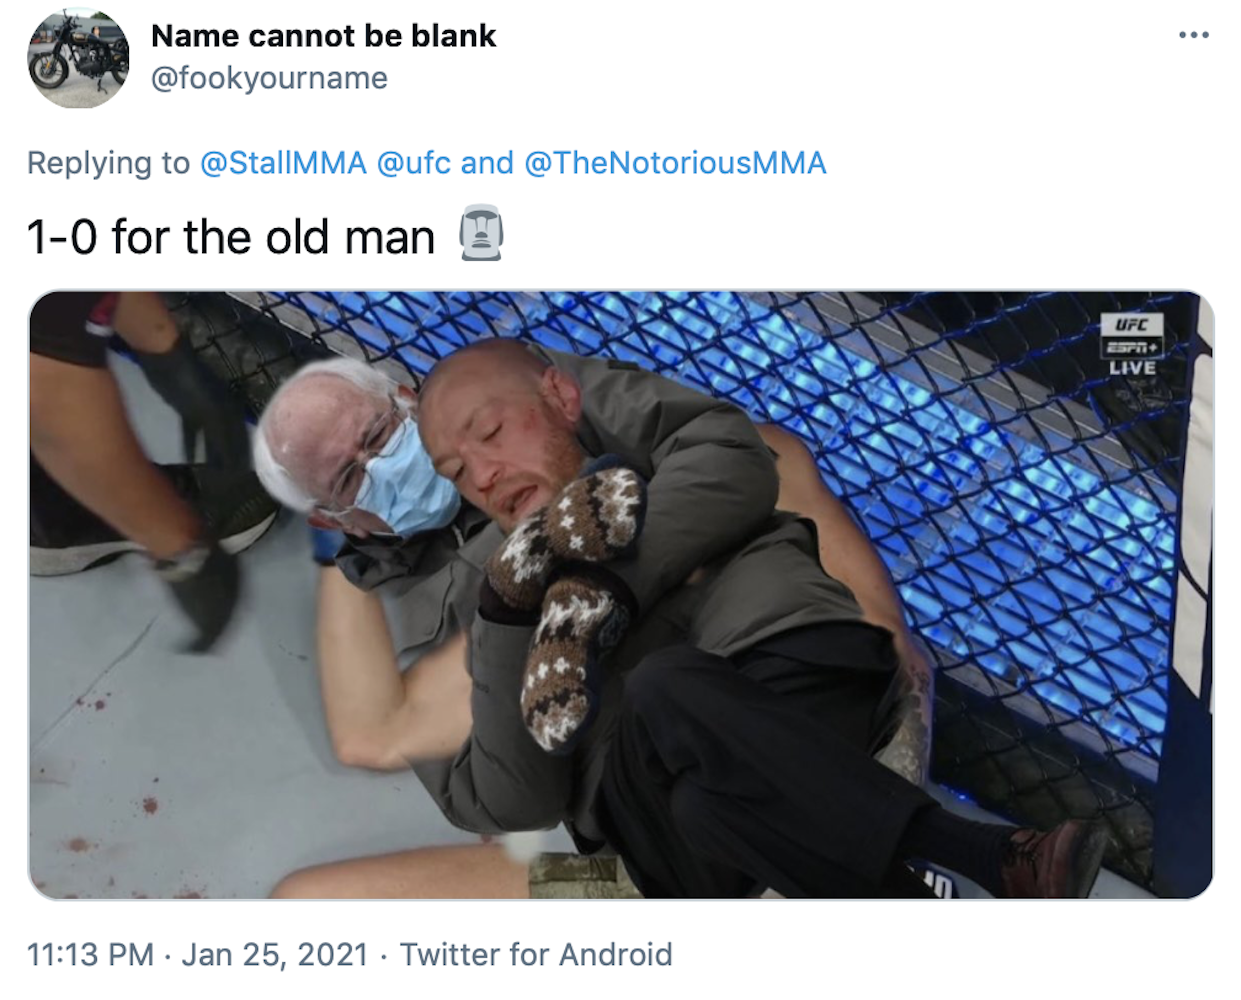 "1-0 for the old man Moyai" Bernie Sanders, taken from the inauguration photo, is photoshopped into McGregor's picture so he holds the unconscious man in a chokehold